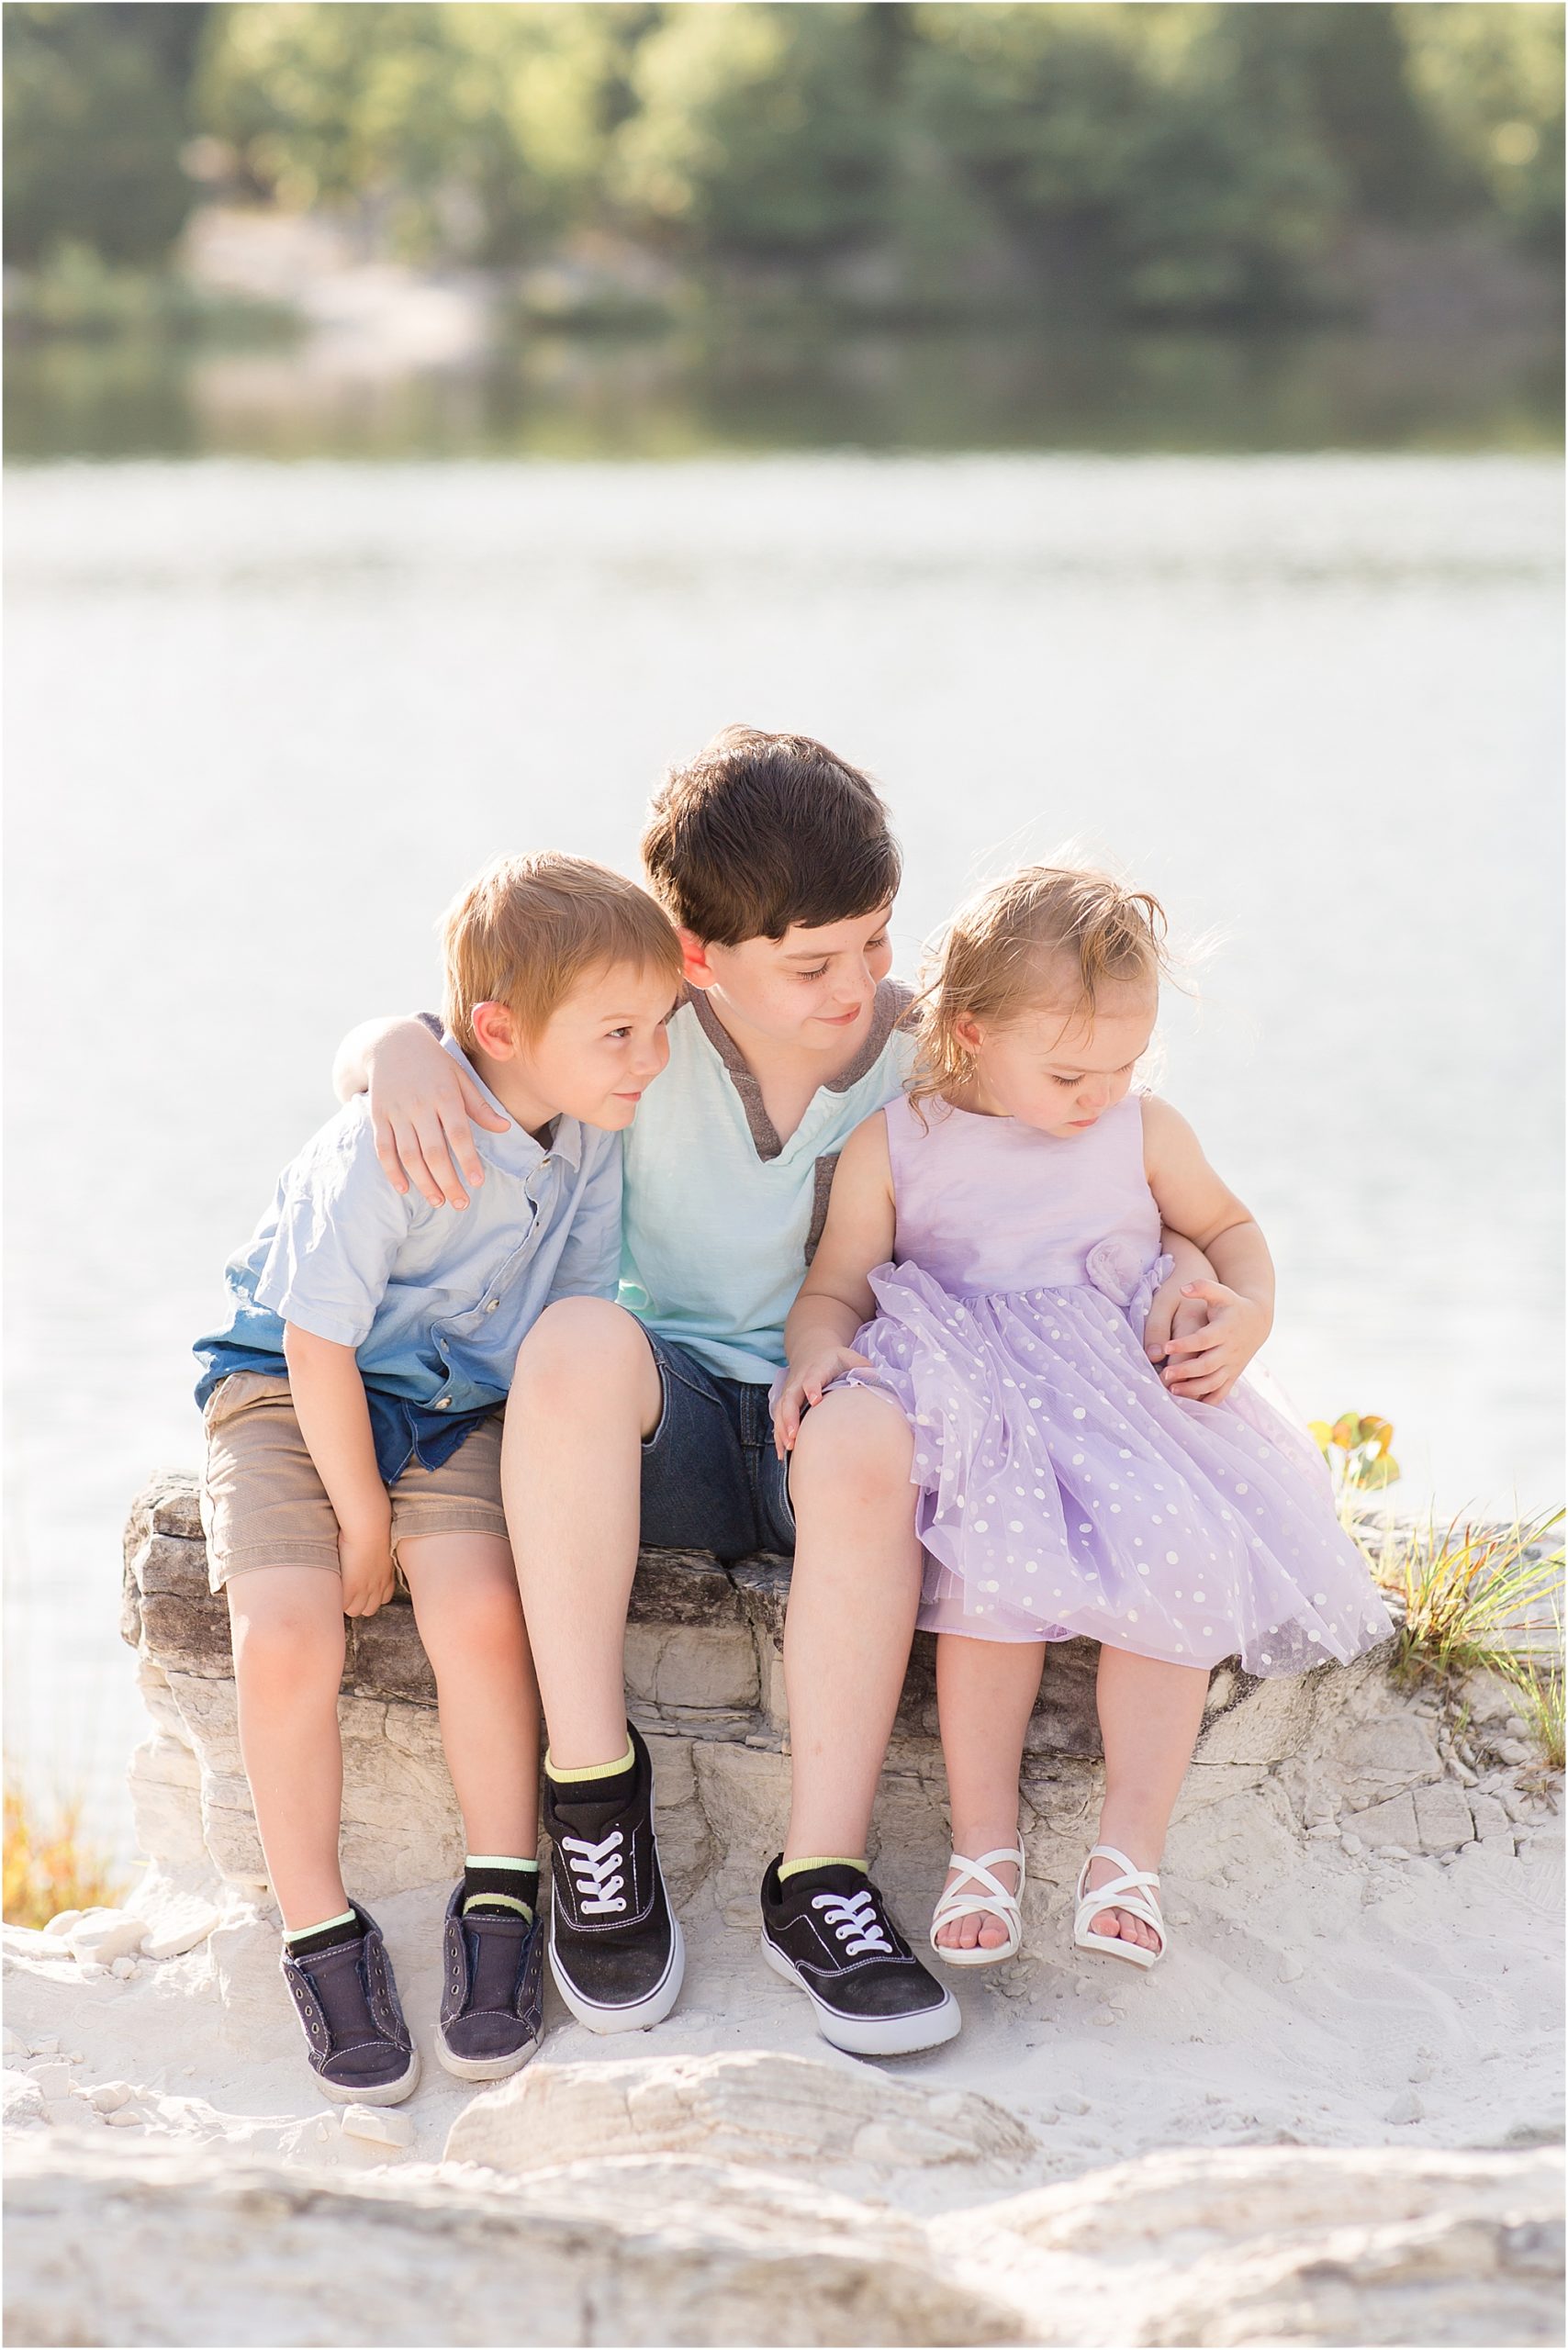 Siblings are seated on a rock just in front of a beautiful lake. 1st brother is wearing a blue and brown jersey style shirt and jeans shorts. 2nd short sleeve button up shirt in shades of blue and khaki shorts. Little sister is wearing a purple dress and white sandals. 